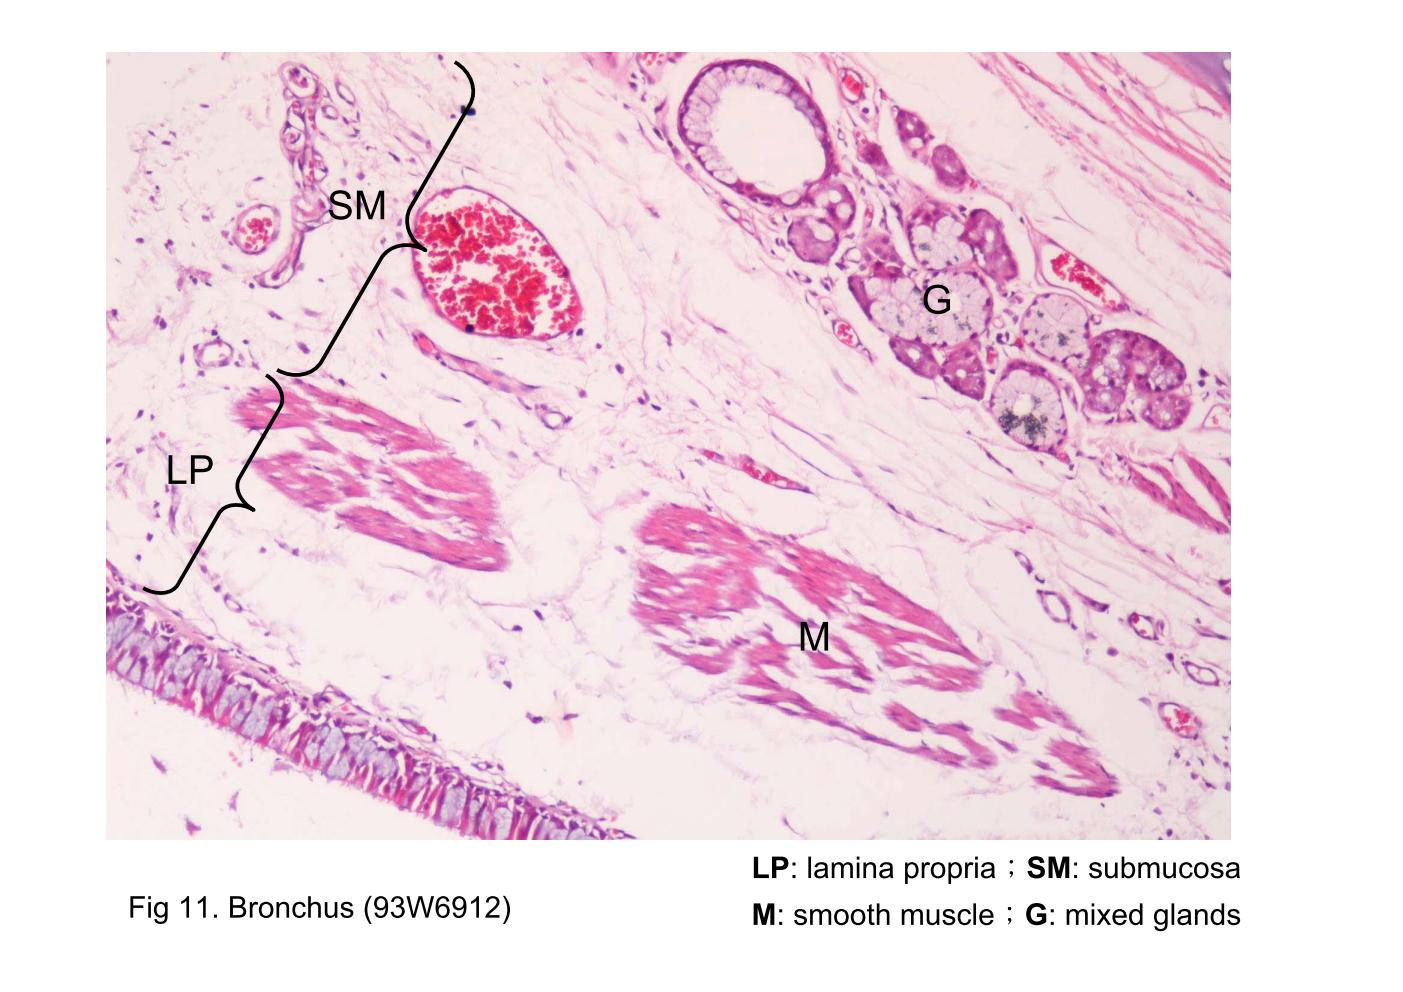 block9_24.jpg - Fig 11. Bronchus (93W6912)The basic structure of the bronchi (B) is similar to that of the trachea, but differs in details, as follows: The lamina propria (LP) is separated from the submucosa (SM) by a discontinuous layer of smooth muscle (M) which becomes progressively more prominent in smaller airways. The submucosa layer contains fewer mixed glands (G).